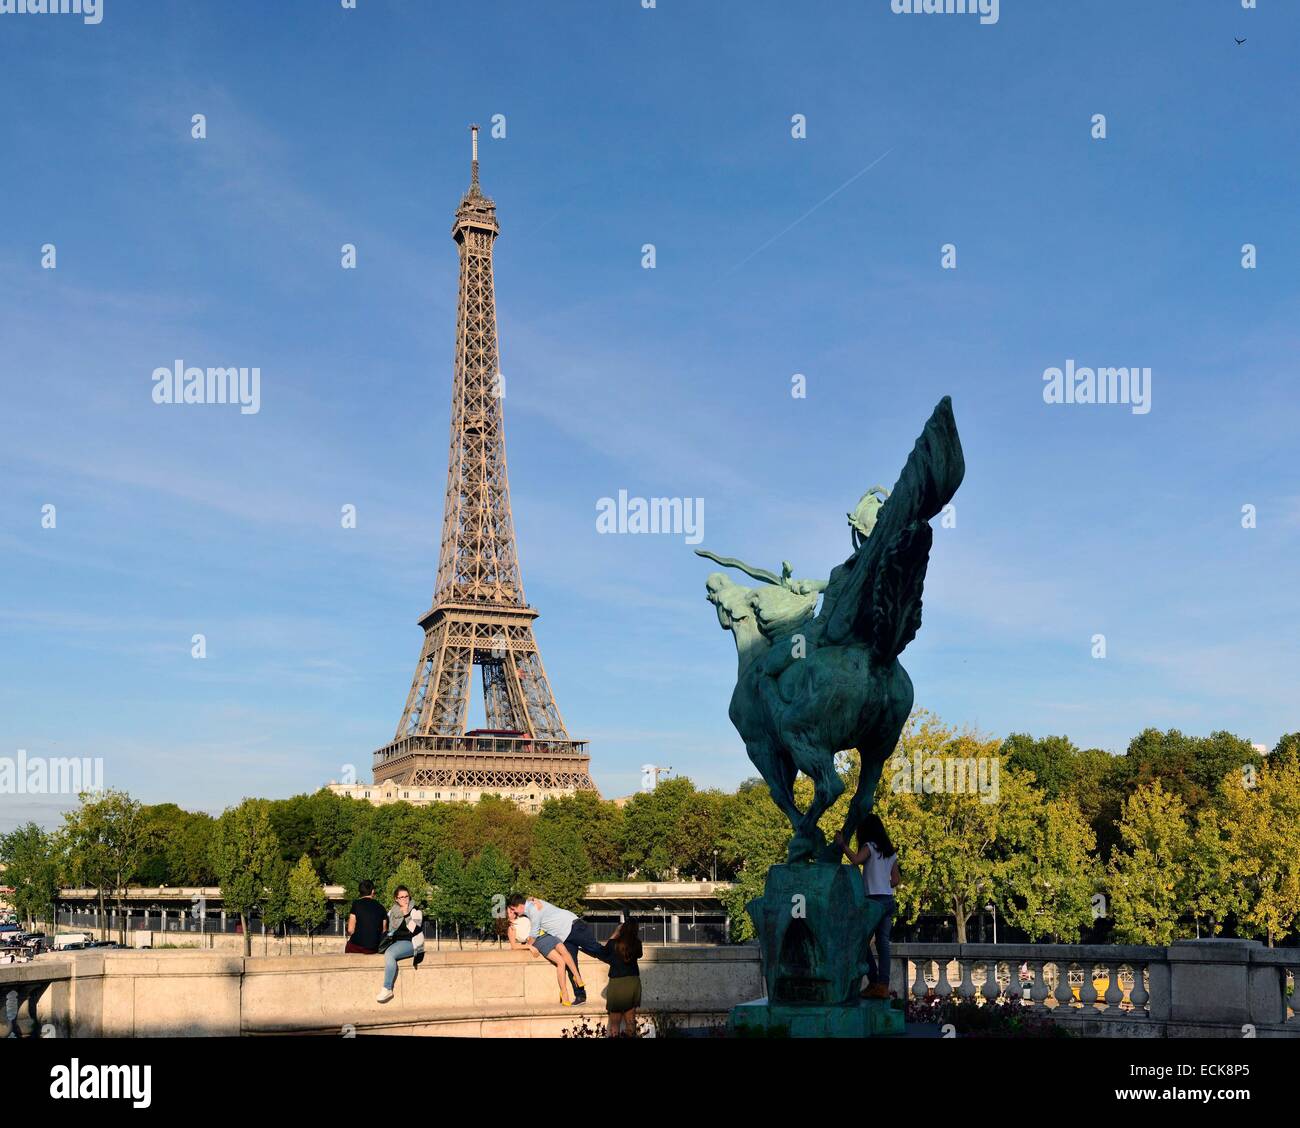 France, Paris, Pont Bir-Hakeim, equestrian statue, symbol of Reviving France by sculptor Wederlink and Eiffel Tower Stock Photo